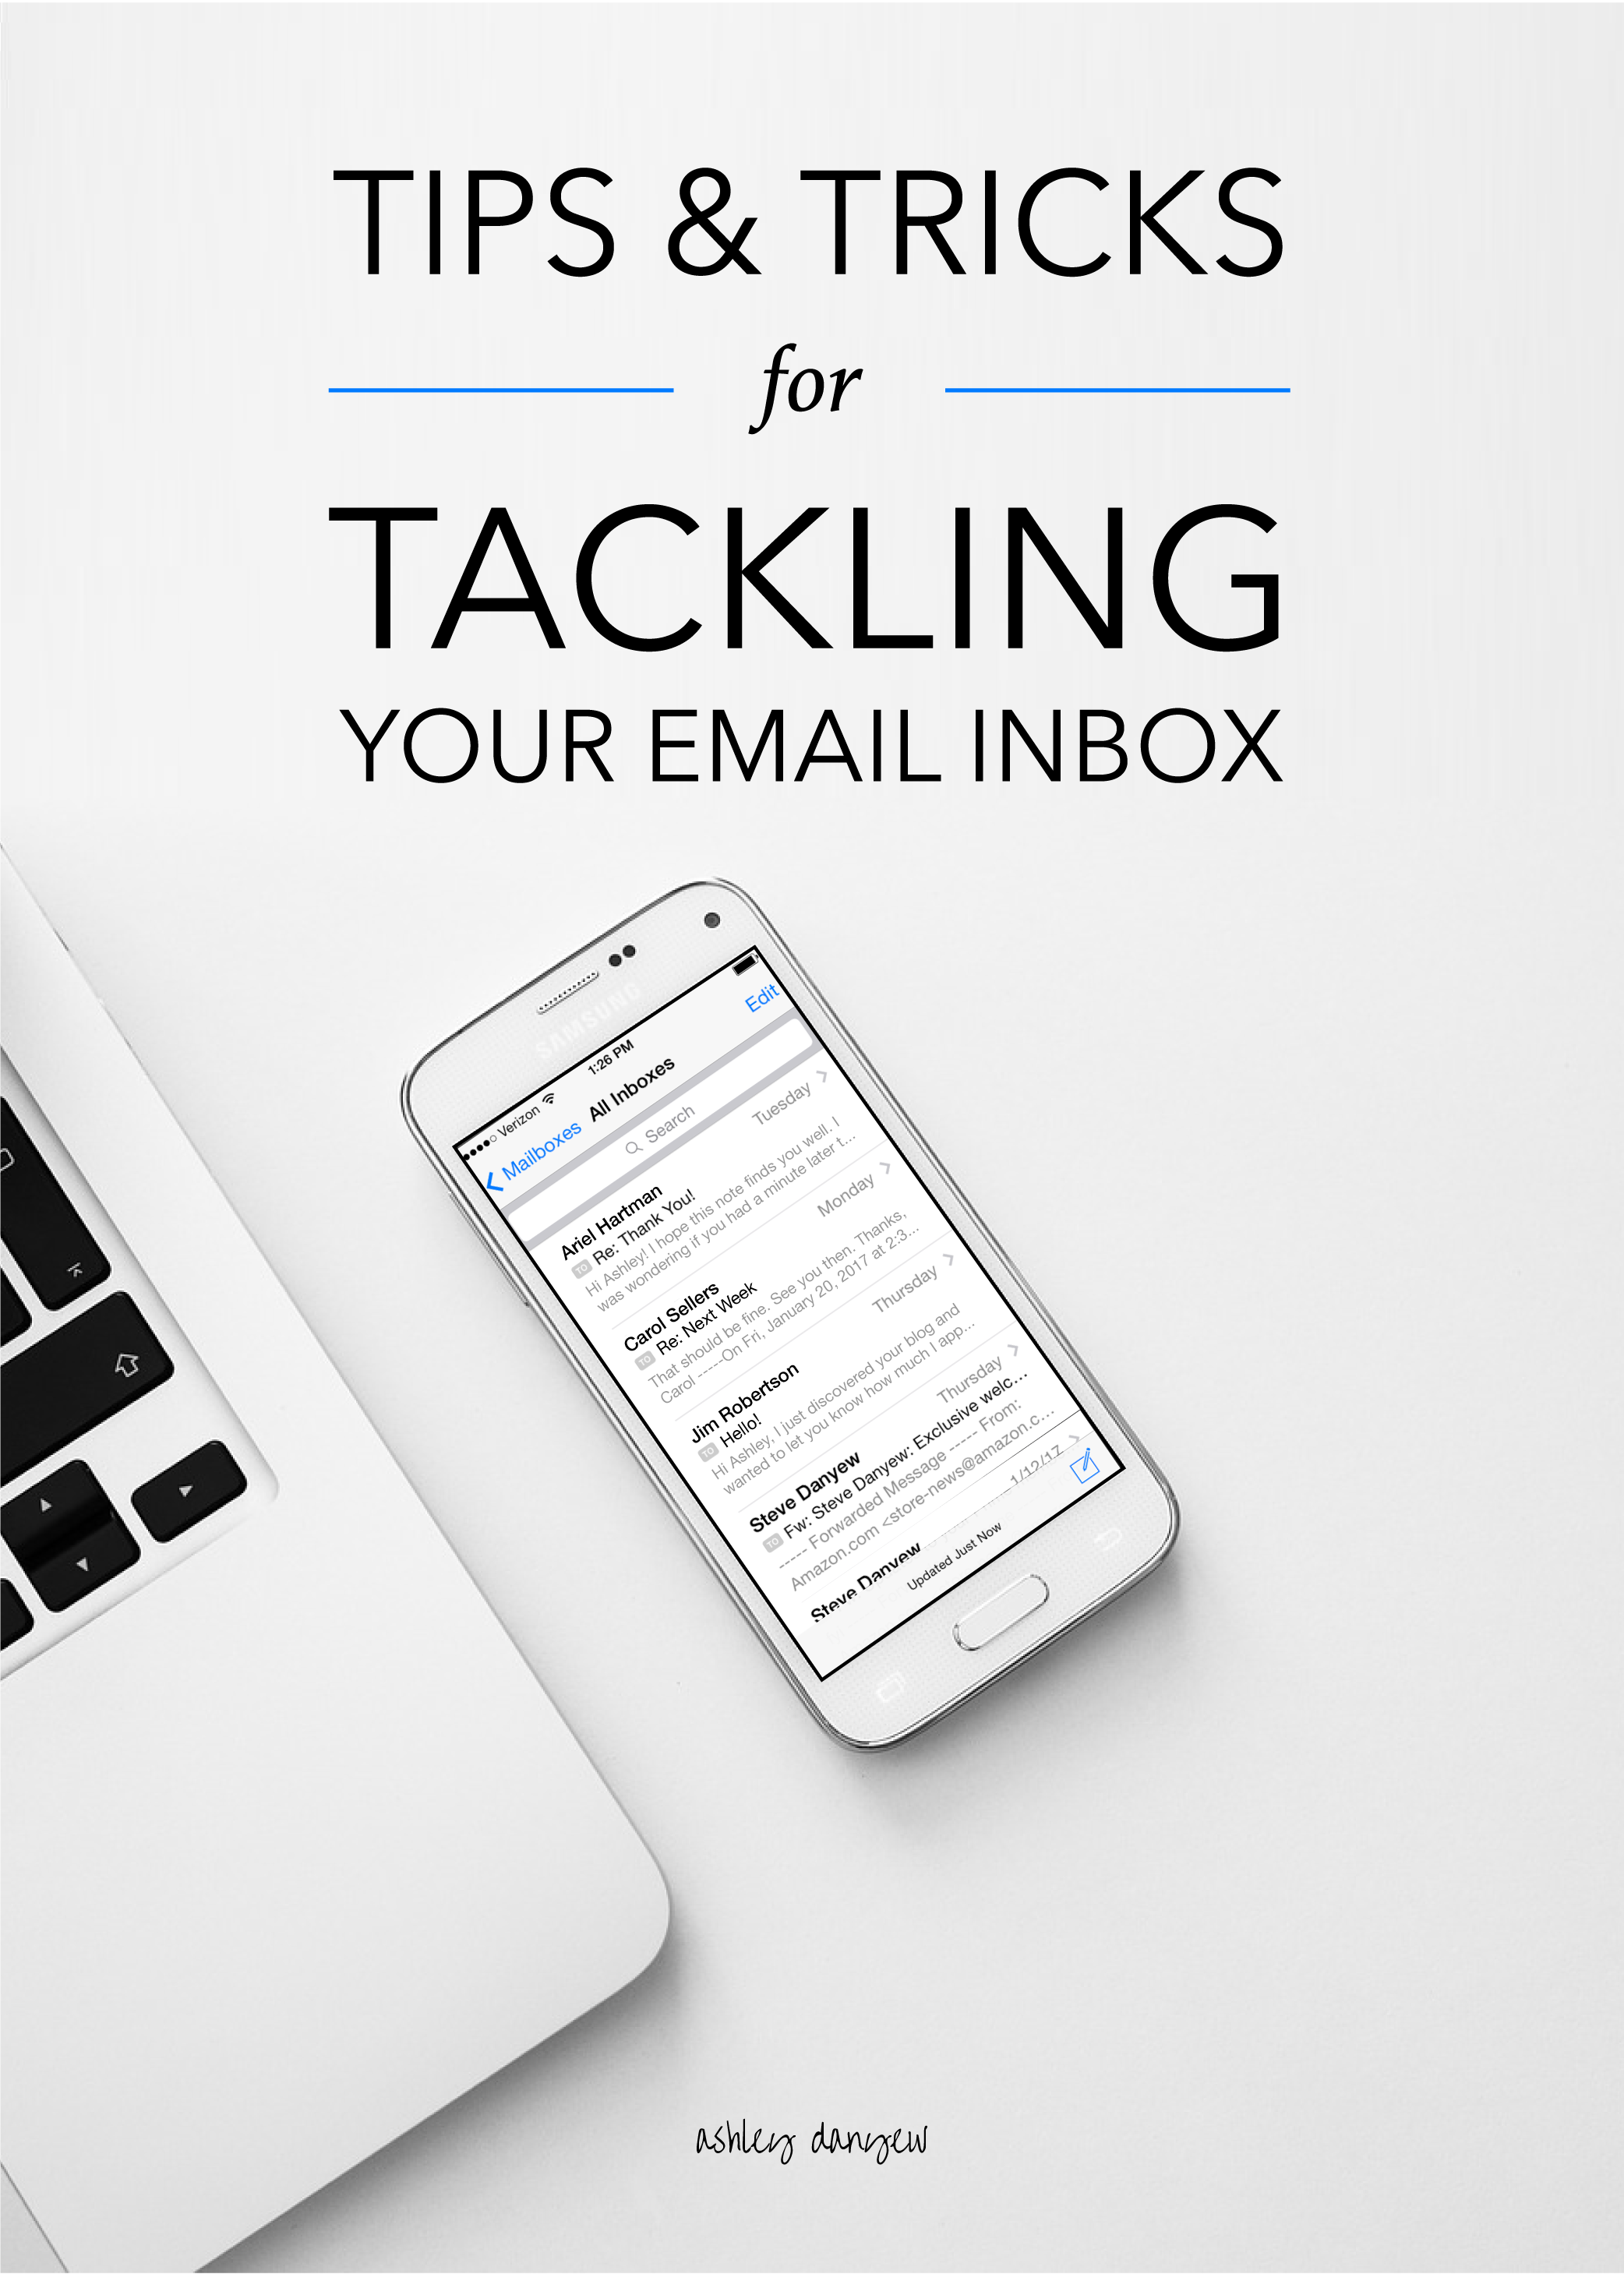 Tips and Tricks for Tackling Your Email Inbox-08.png